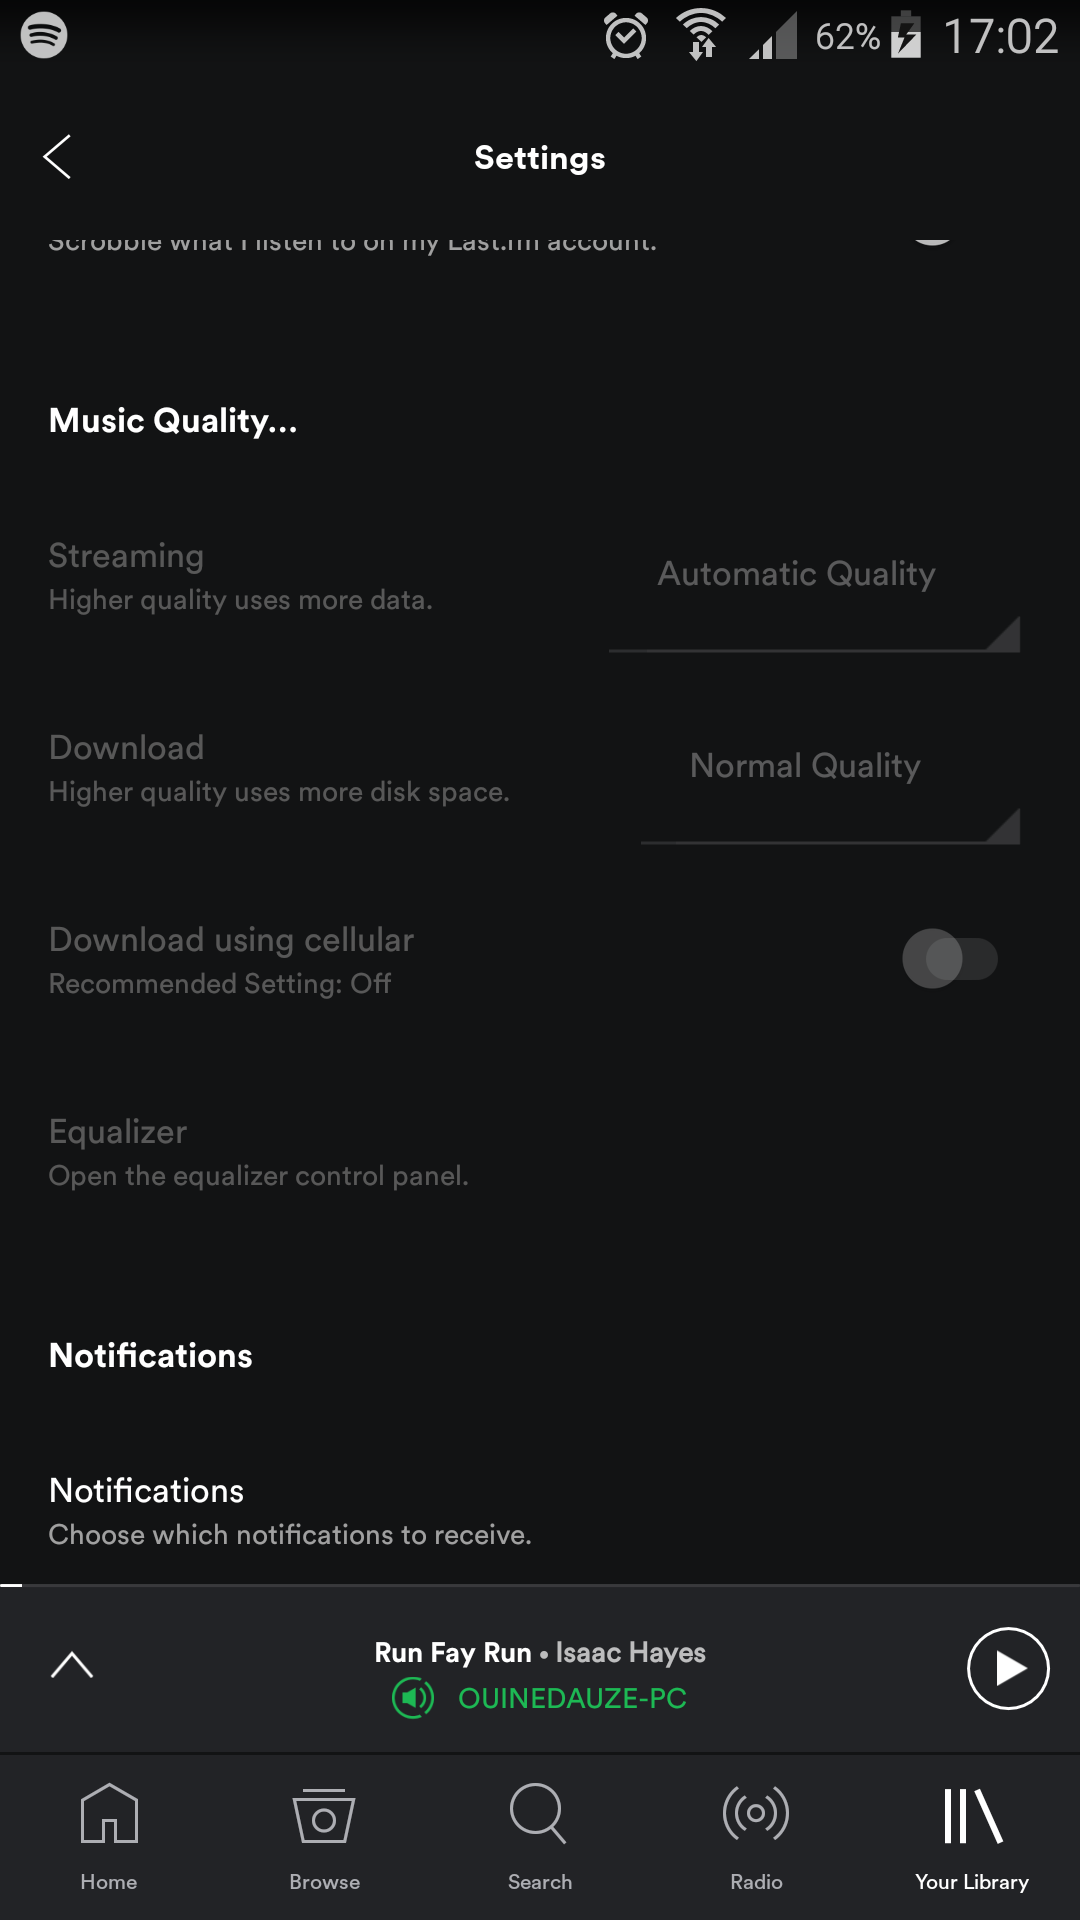 Solved: Premium features on Android - Page 5 - The Spotify Community